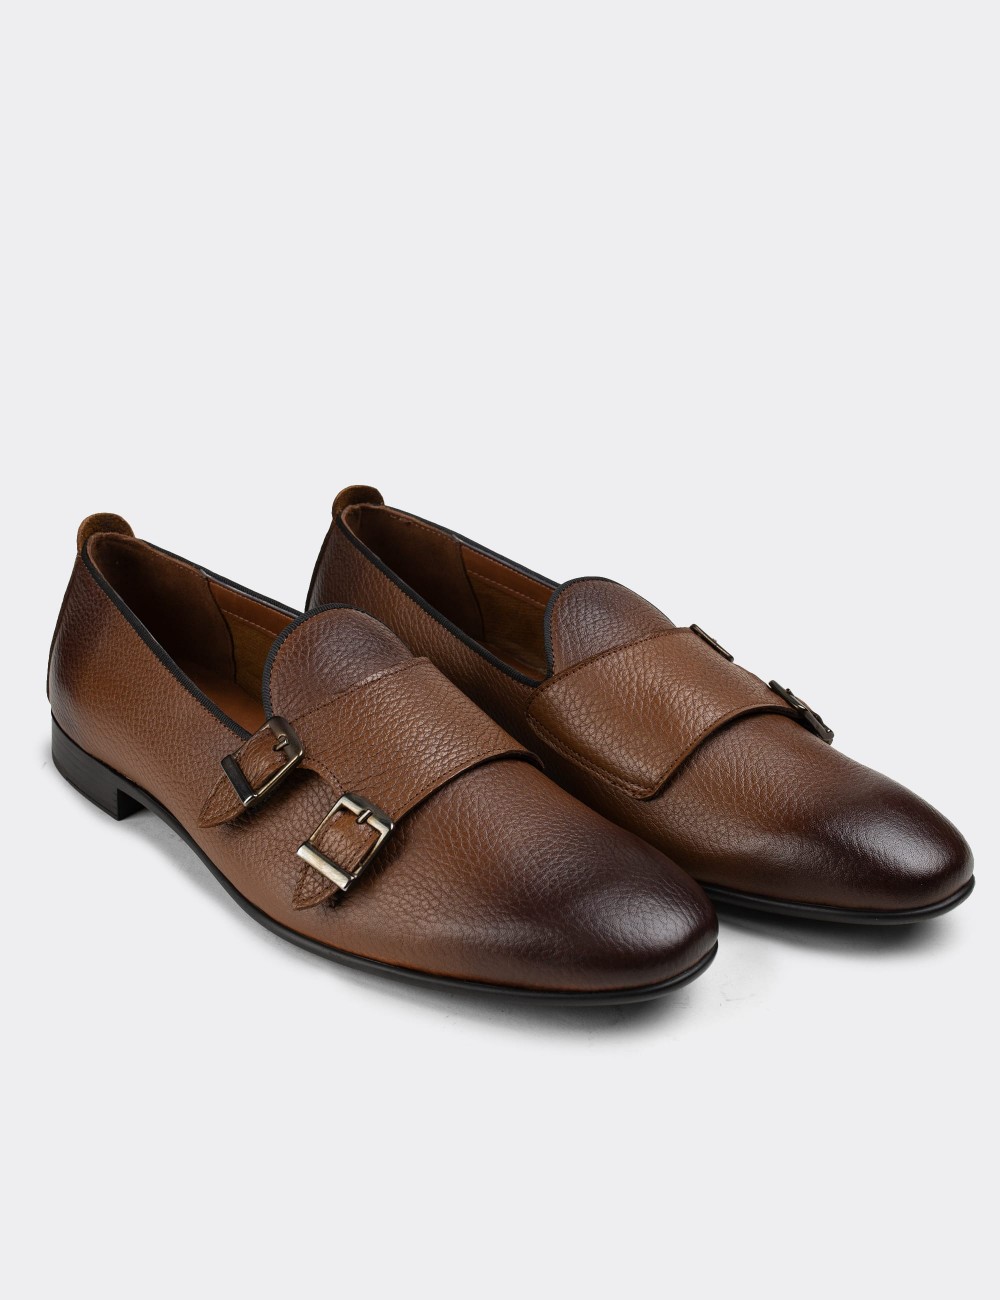 Tan  Leather Loafers Shoes - 01705MTBAC03